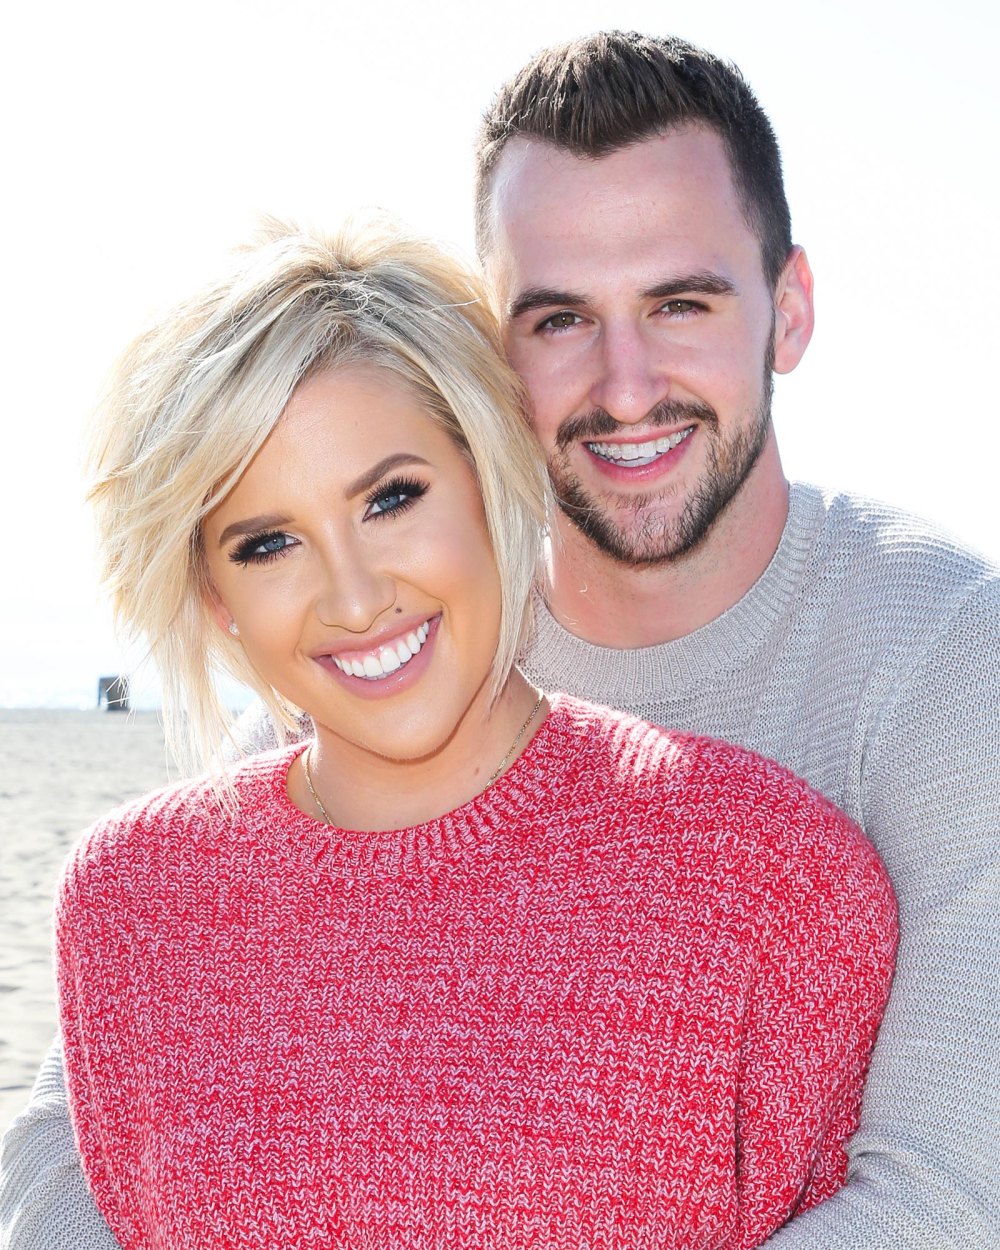 Savannah Chrisley s Ex Nic Kerdiles Was Over Alcohol Limit When He Died in Motorcycle Crash Report 236